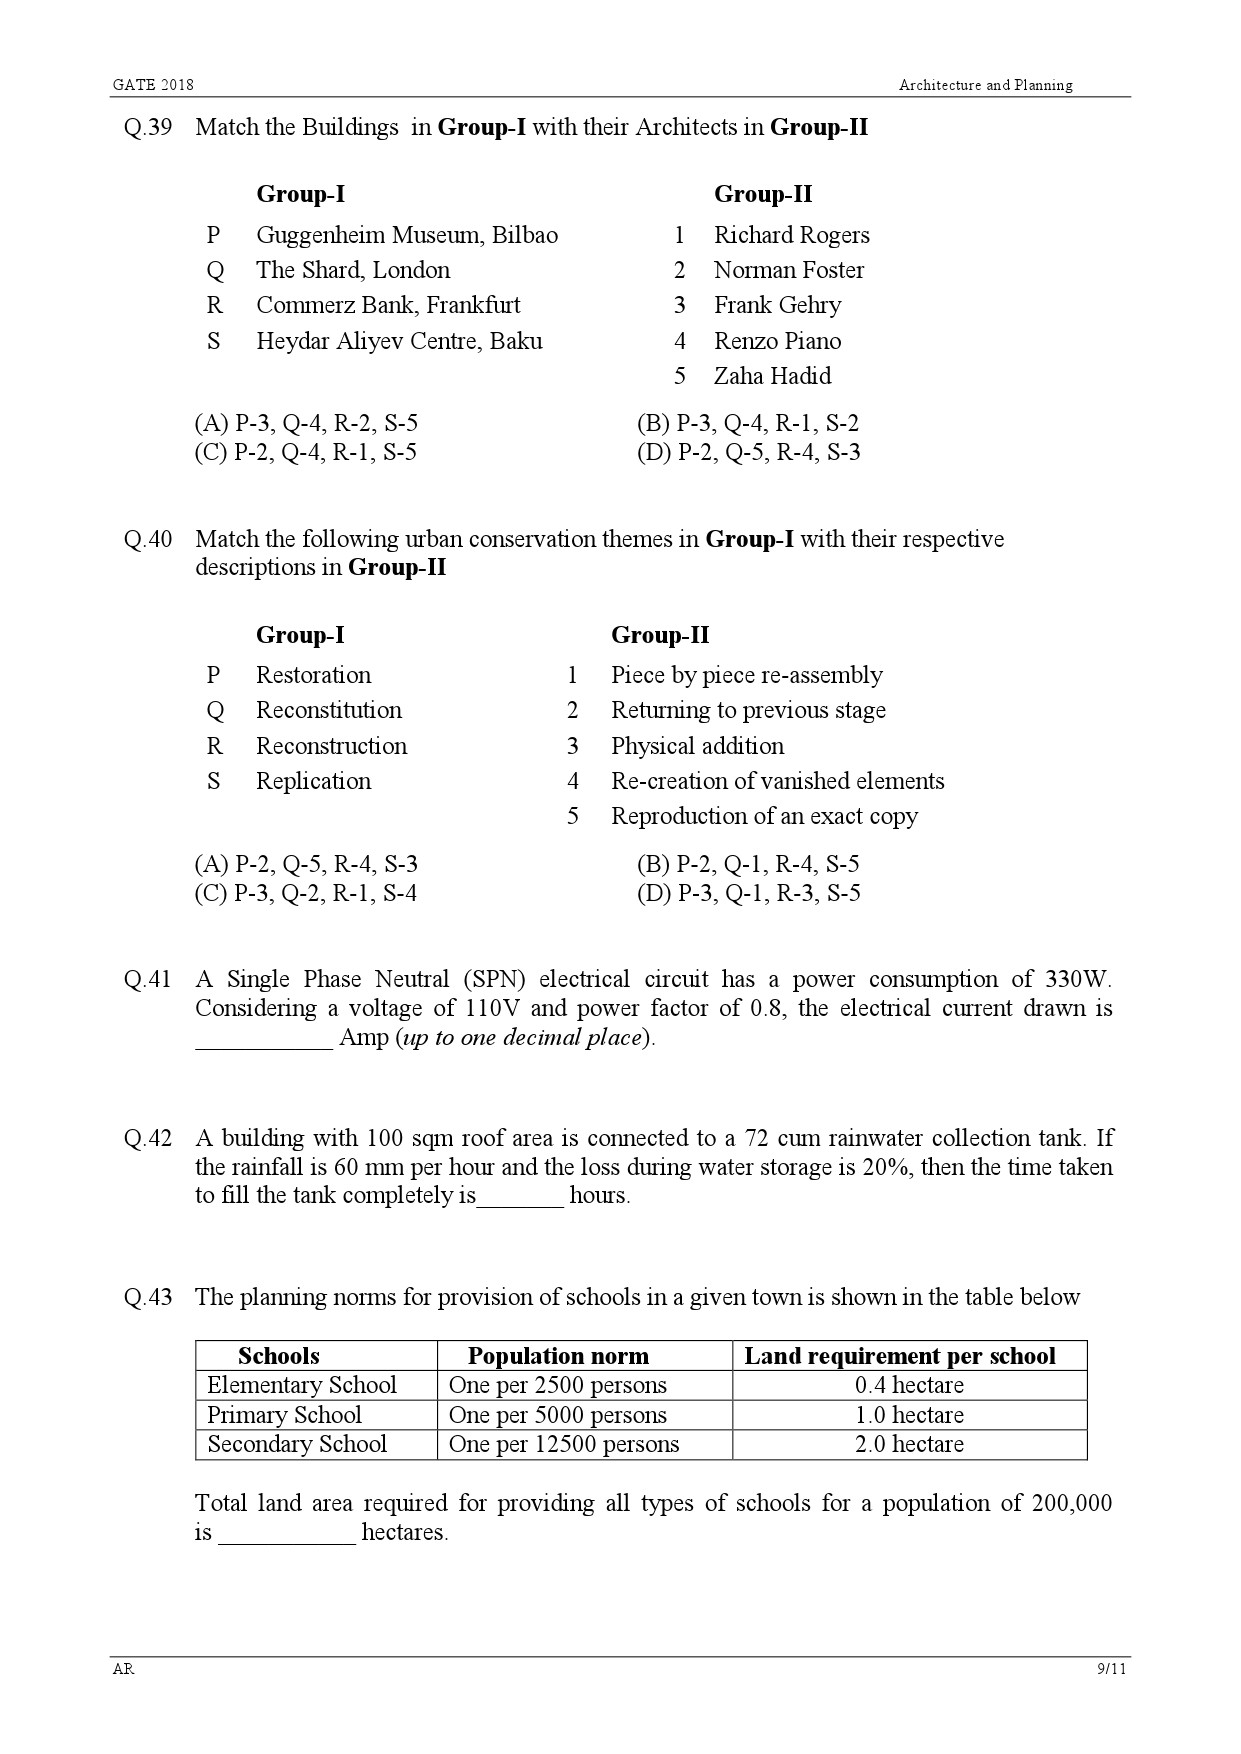 GATE Exam Question Paper 2018 Architecture and Planning 11